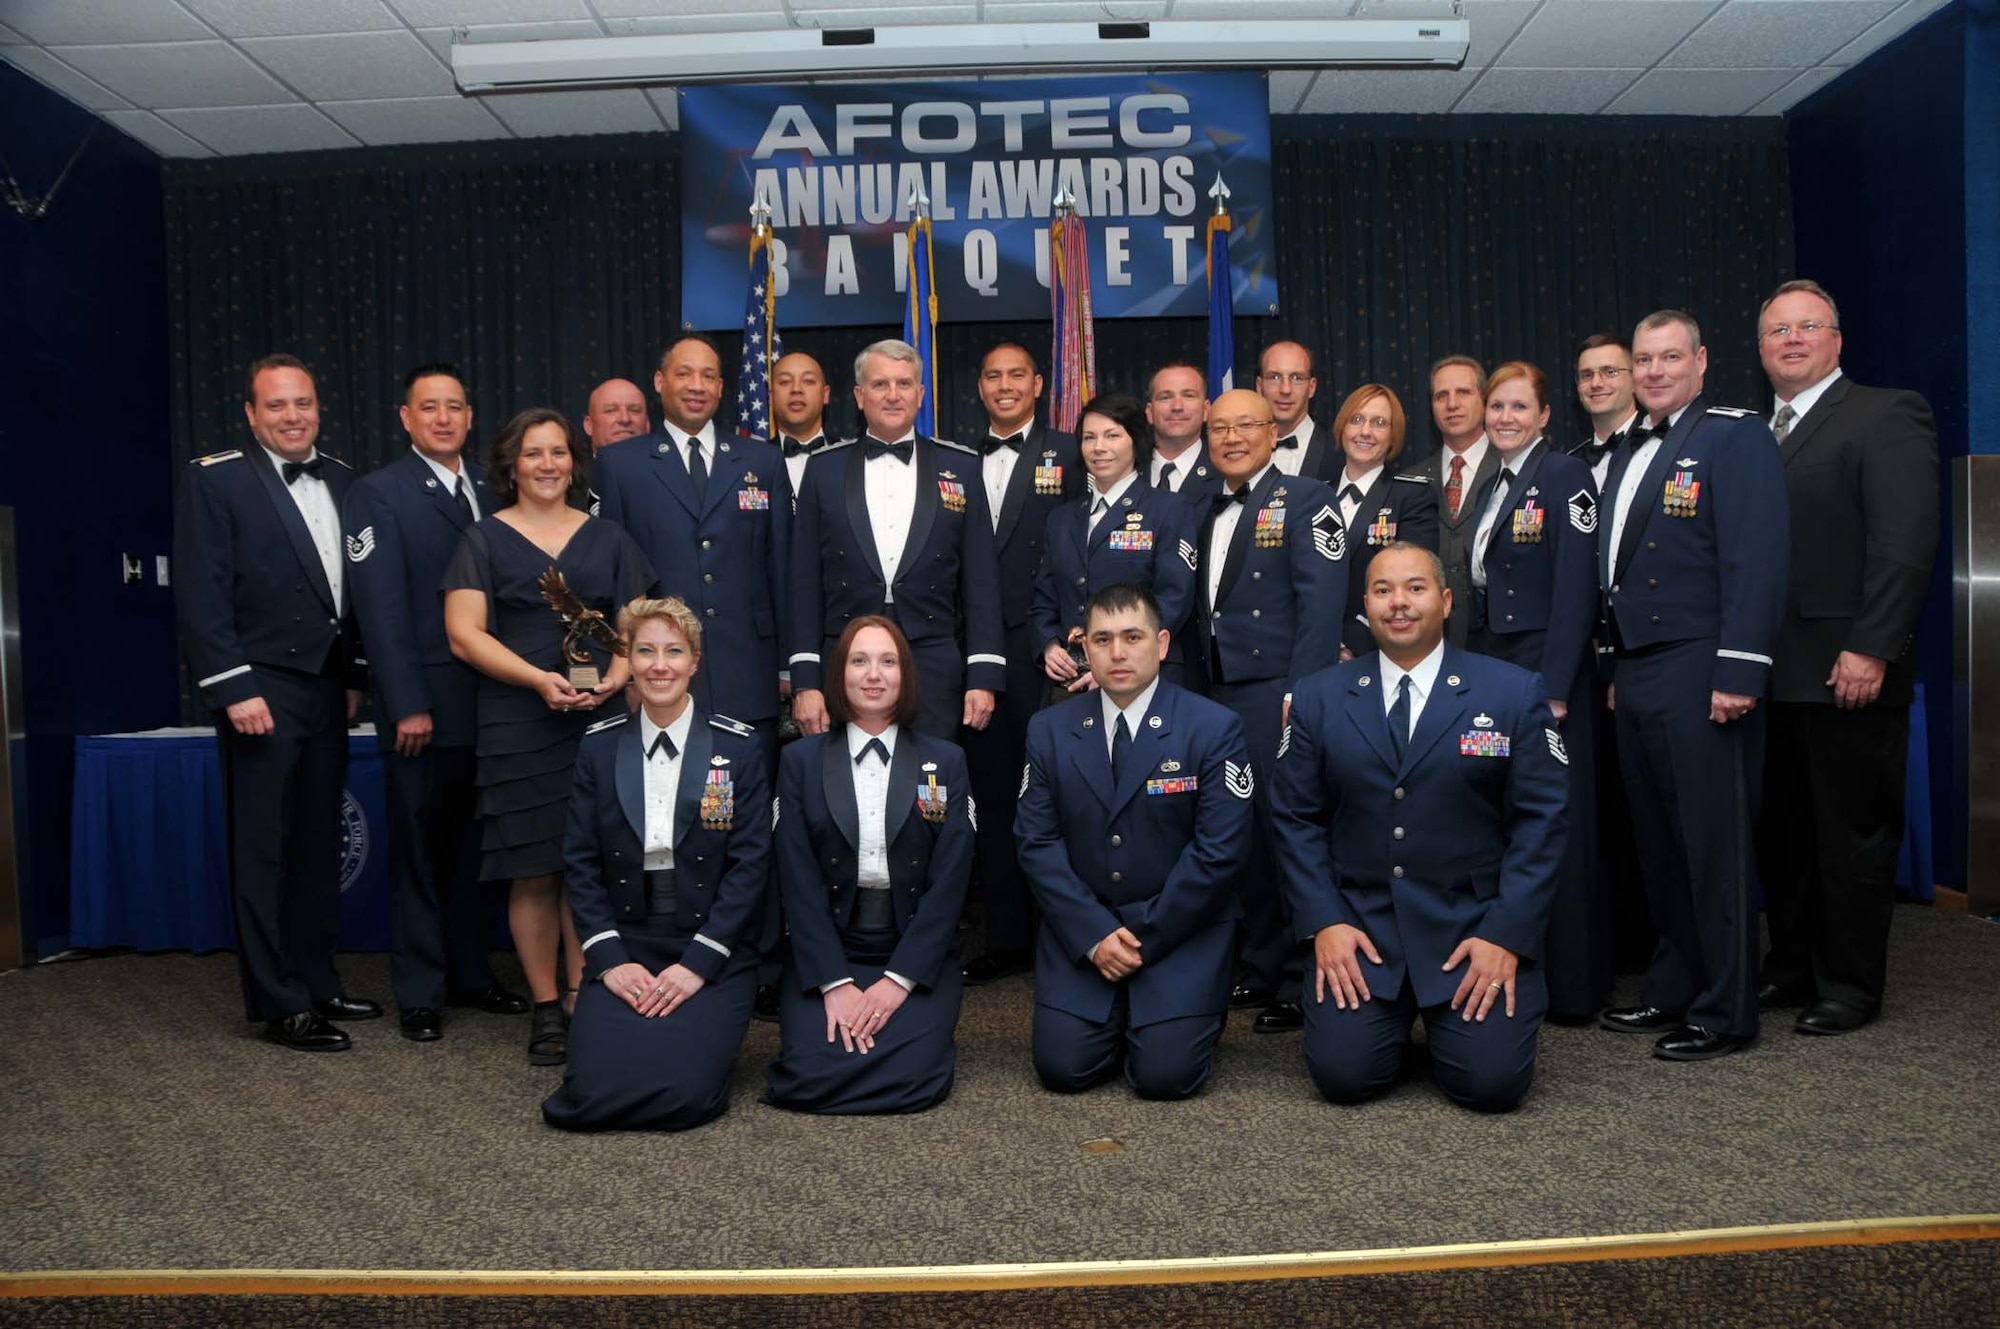 Air Force Operational Test and Evaluation Center Commander Maj. Gen. David J. Eichhorn (center row, third from left) joins outstanding AFOTEC performers from 2010 that were honored during the March 24 AFOTEC Annual Awards Banquet.
